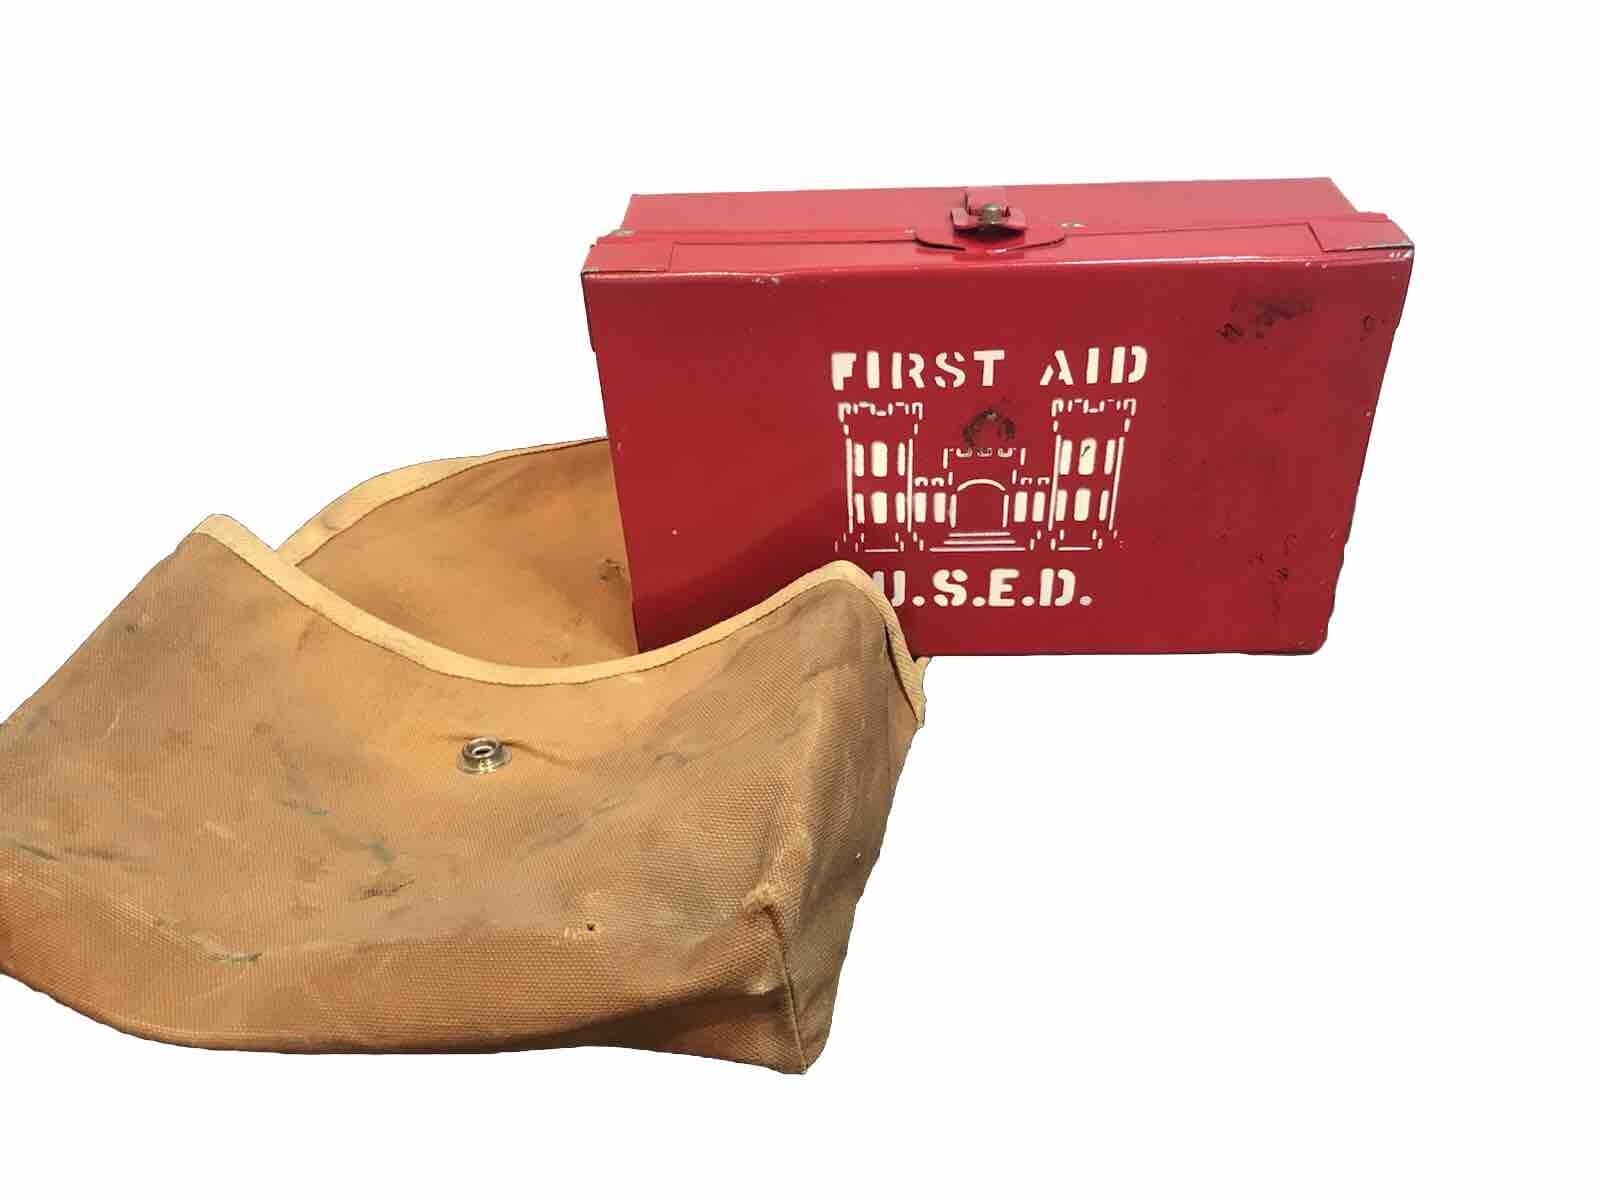 Vintage Military Red Metal First Aid Kit With Bag U.S.E.D